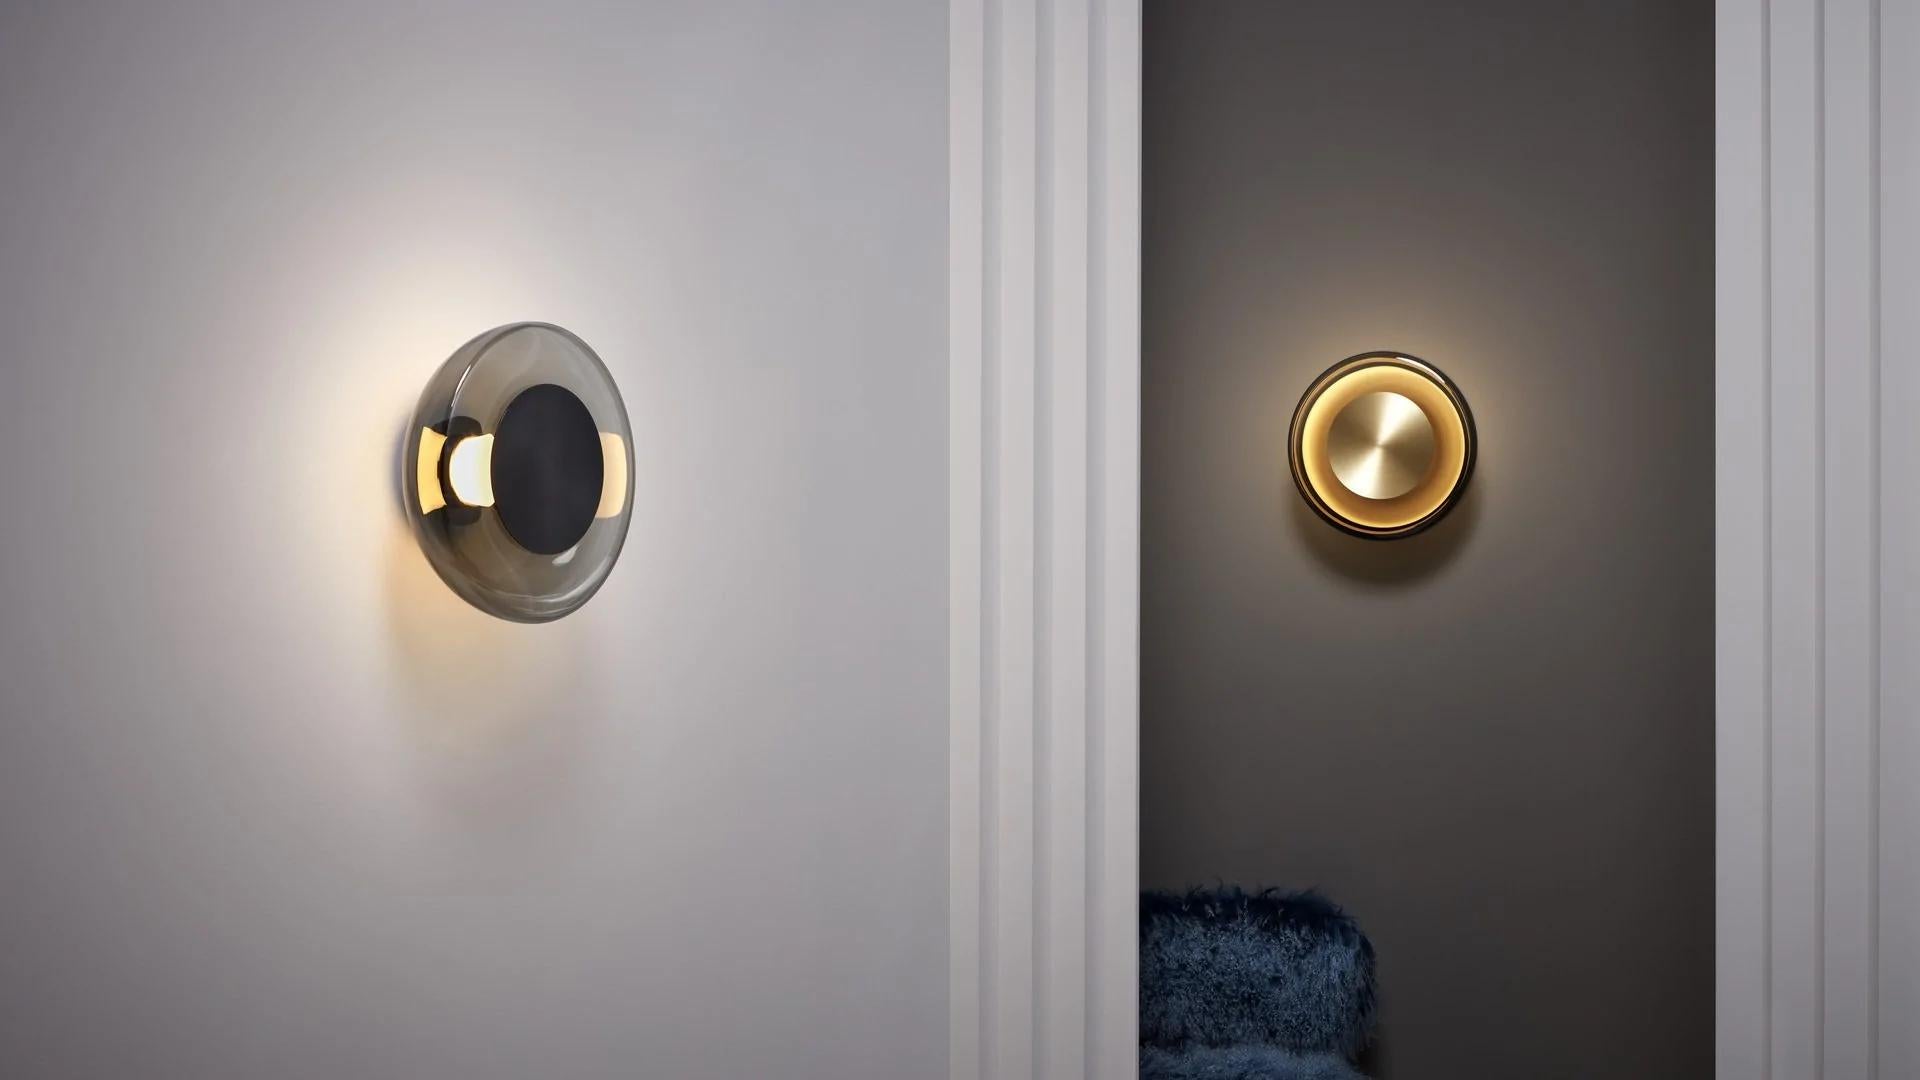 Pendulum wall/ceiling light by CTO Lighting
Materials: satin brass with smoked glass shade.
Also available in bronze with smoked glass shade.
Dimensions: W 32 x D 15 x H 32 cm

All our lamps can be wired according to each country. If sold to